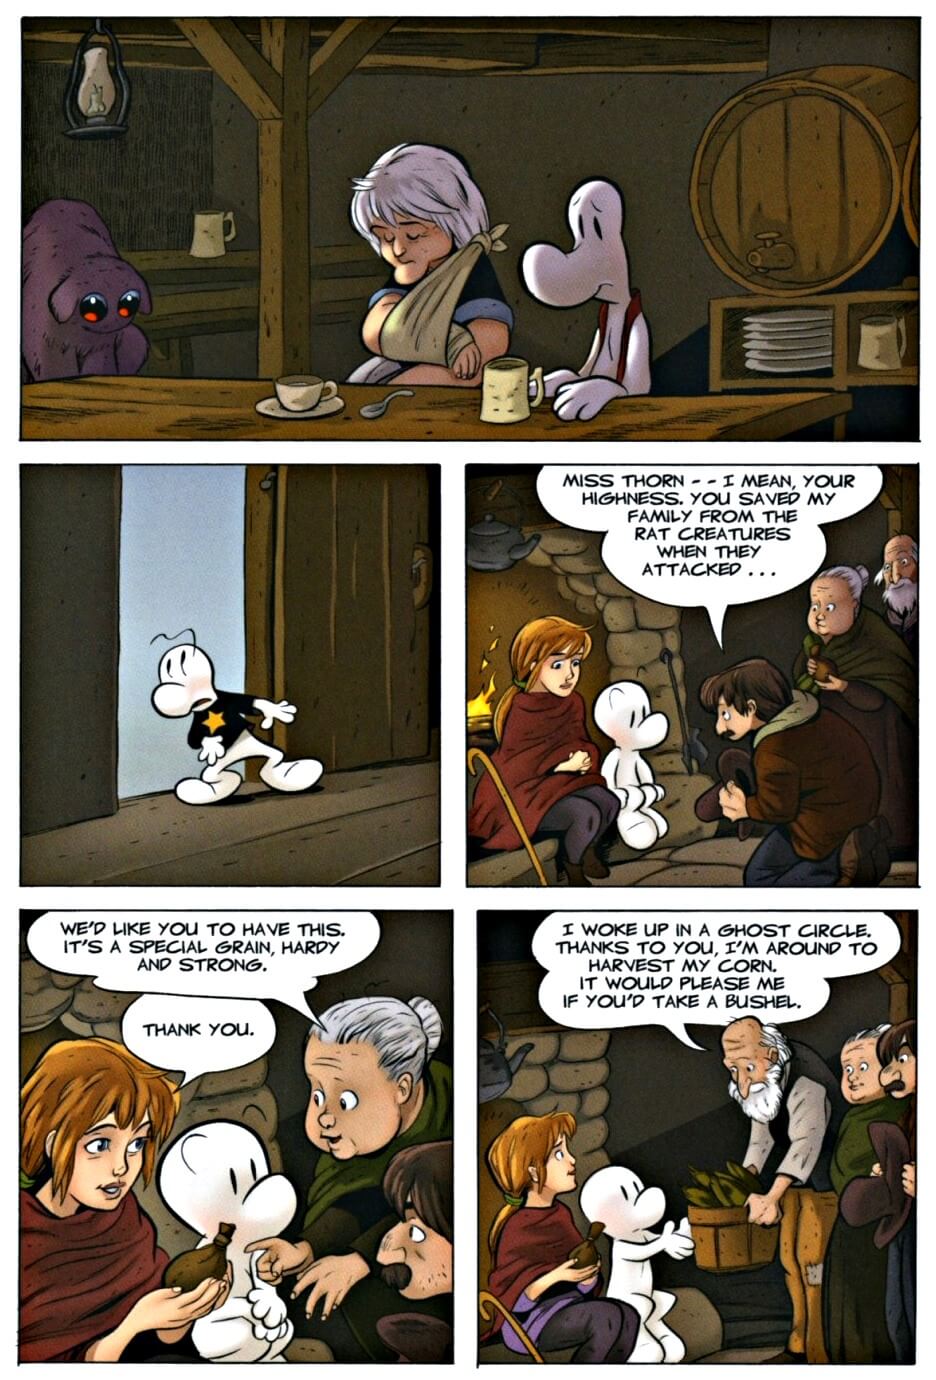 page 193 chapter 6 of bone 9 crown of horns graphic novel